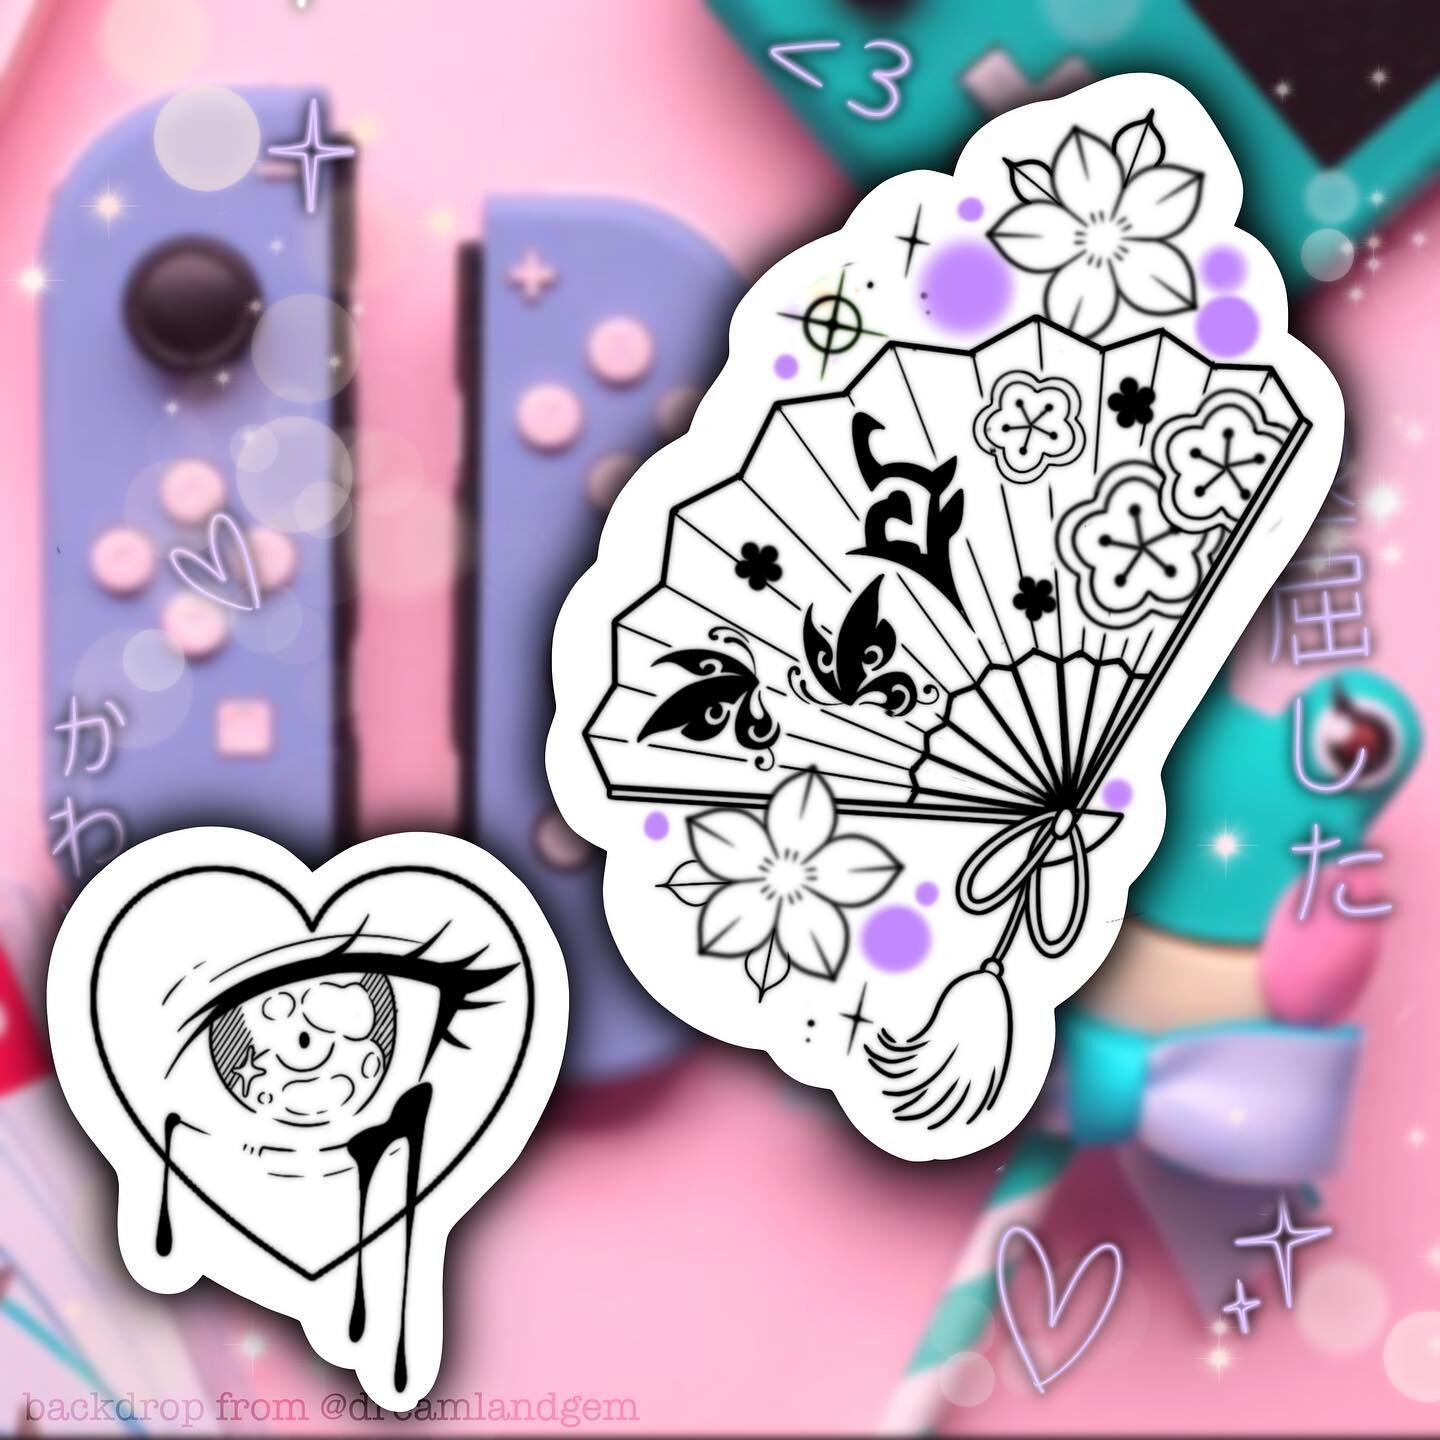 // flash drop! 👉 swipe to check out the latest flash designs from the one and only @isabelly 💜 

#kawaii #kawaiiartist #kawaiitattoo #kawaiitattooflash #anime #london #londontattoo #londontattooartist #girltattooer #art #girlswithtattoos #cute #tat